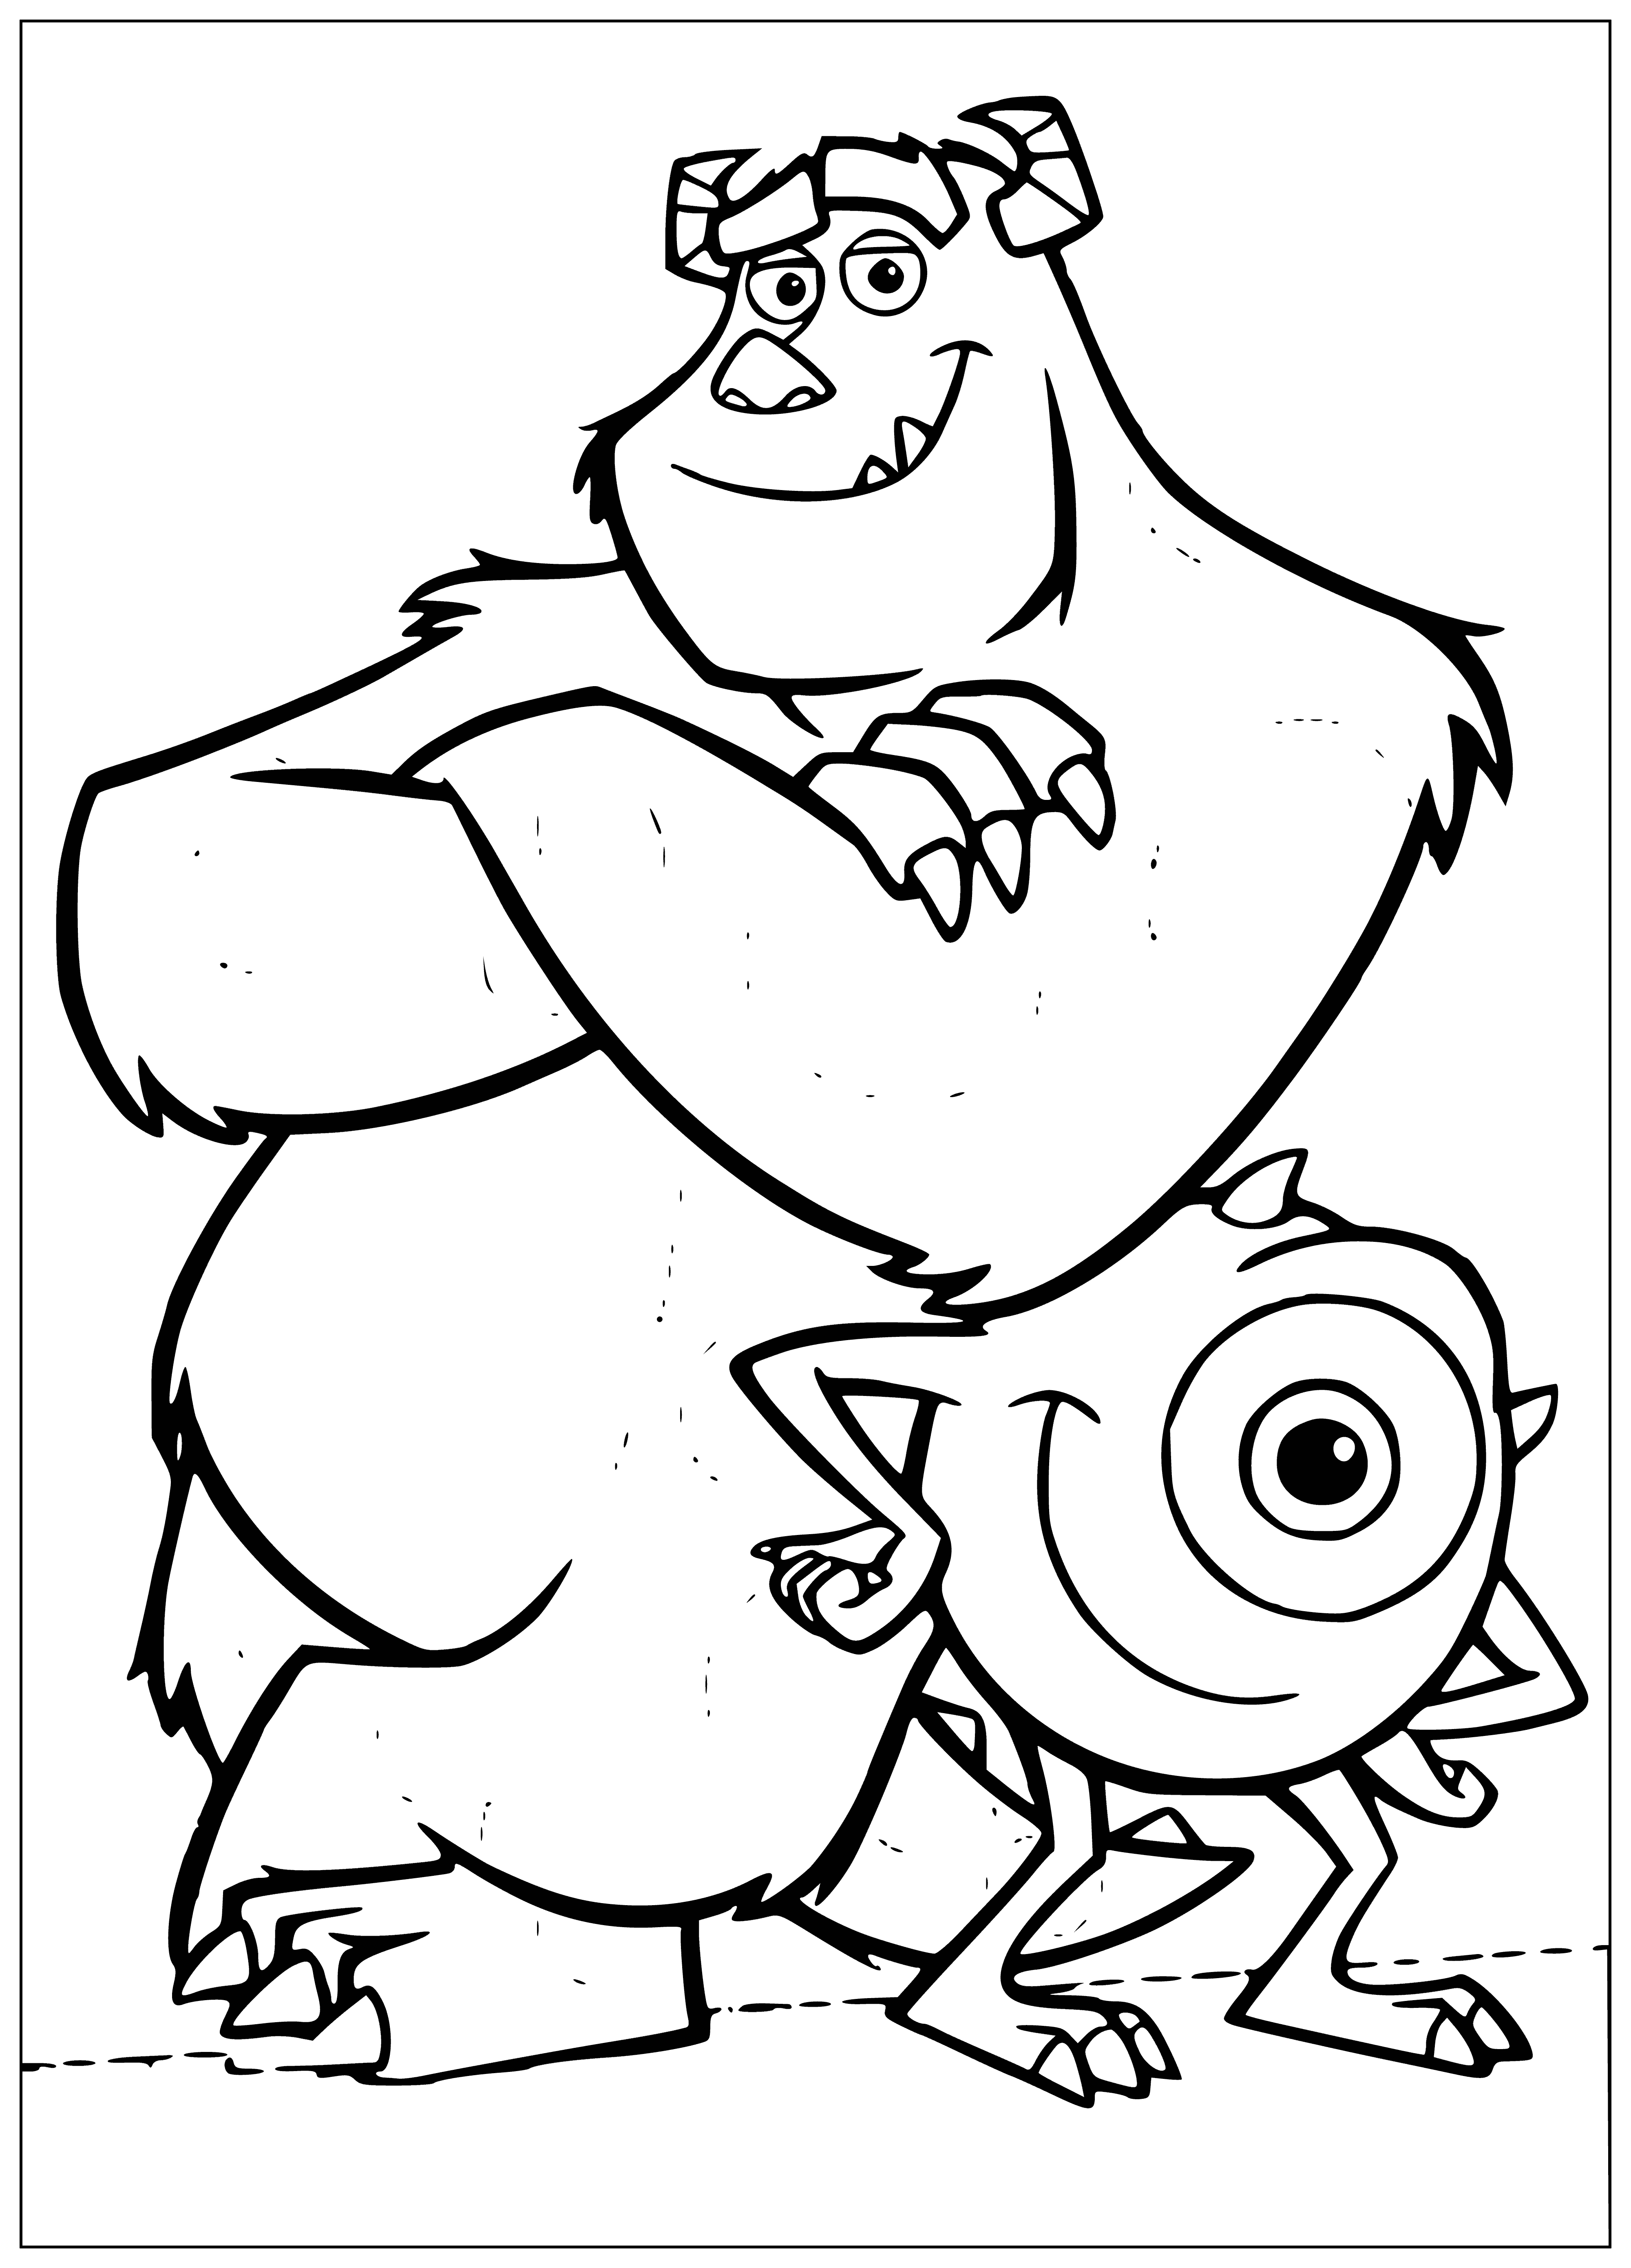 coloring page: Sally and Mike, two monster friends, smile in this fun coloring page from Monster Inc.